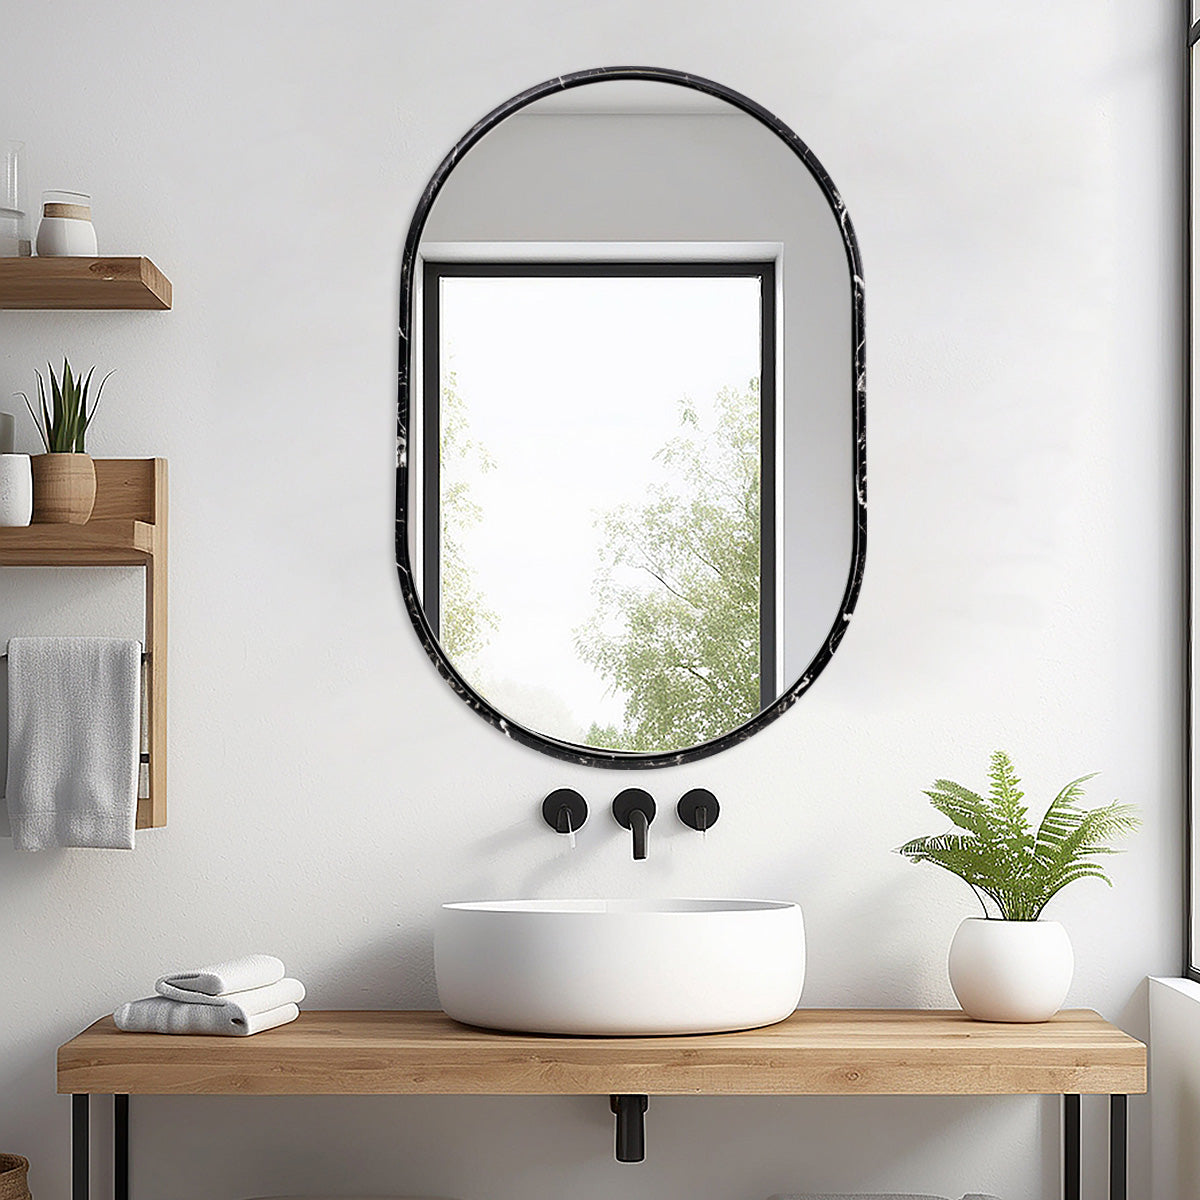 Contemporary High End Black Marble Framed Pill/ Capsule Shaped Mirrors for Vanity Bath